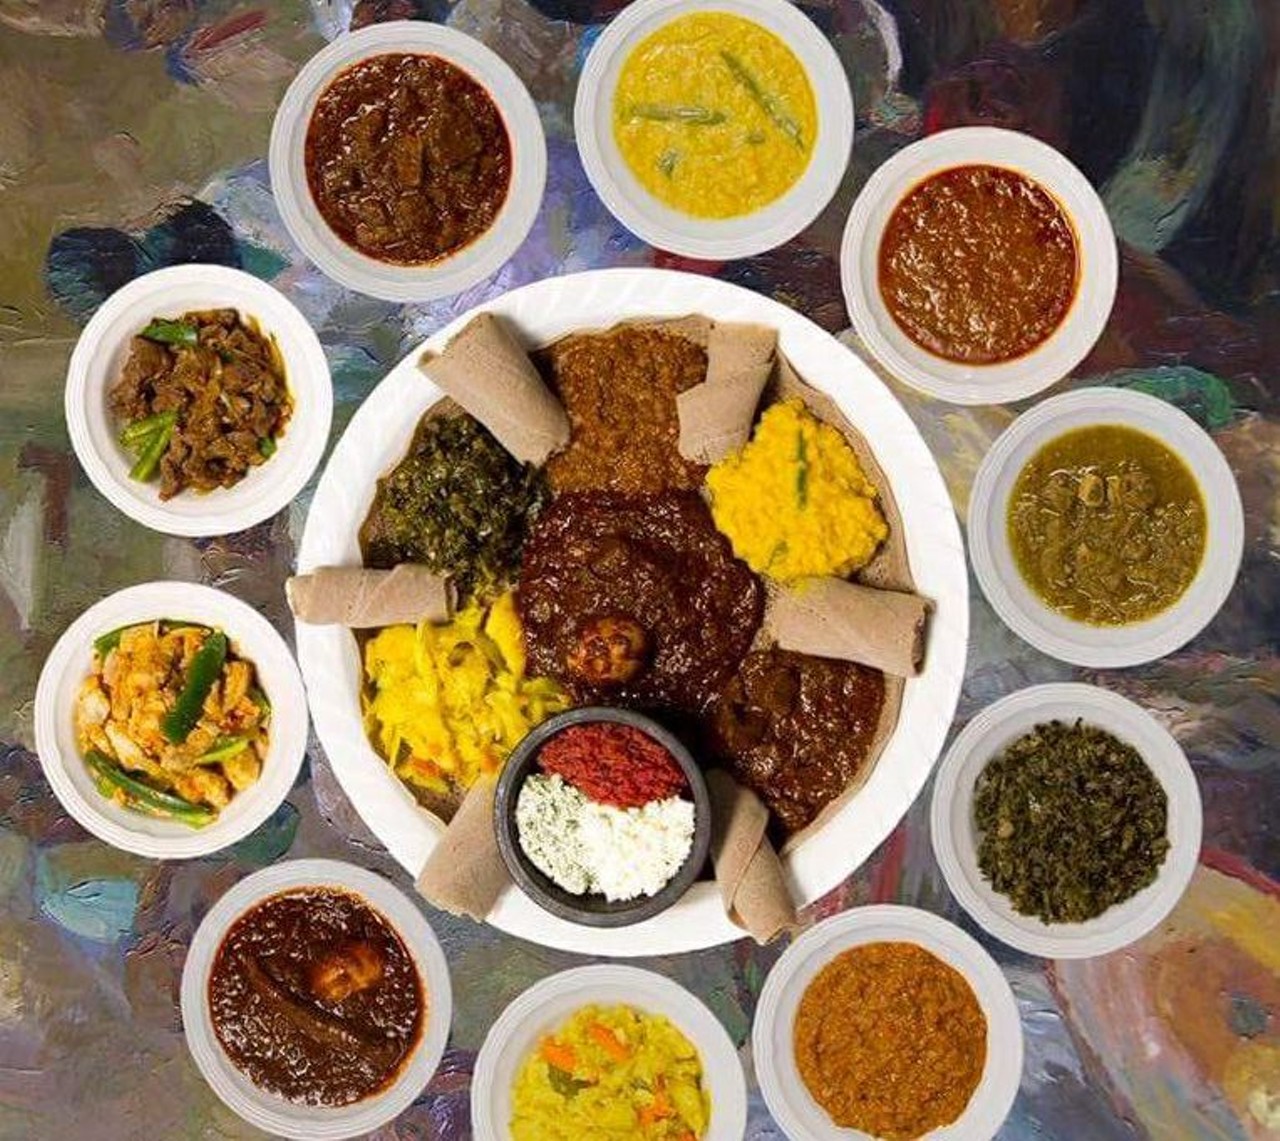  Zoma
2240 Lee Rd., Cleveland Heights
“Zoma's Ethiopian in Cedar Lee. Like. $12-15 (veg vs meat) for a combo platter that is easily 2 meals, maybe 3.”
Via LordSariel/Reddit